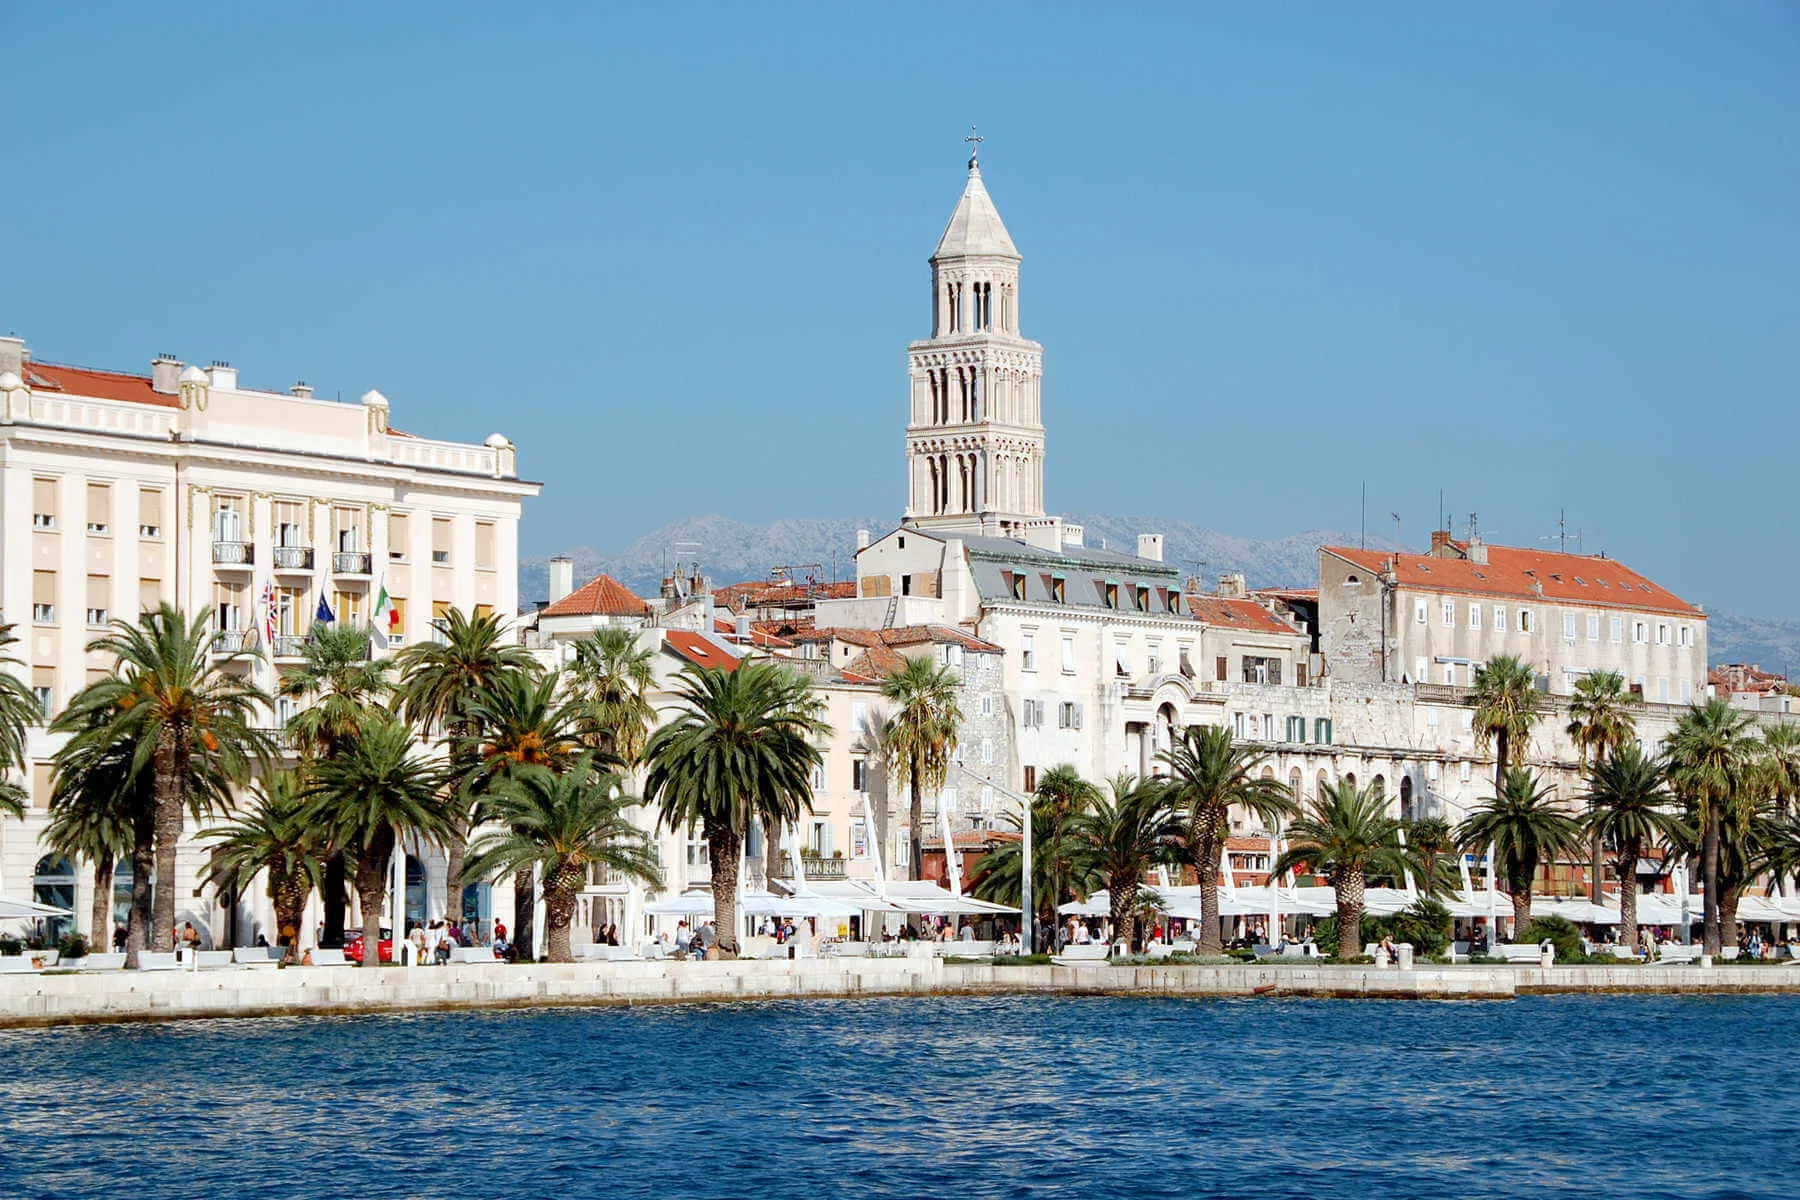 The 200-foot-tall cathedral bell tower rises above Split’s Old Town. Climbing the 183 steep steps to the top rewards you with sweeping views of the city